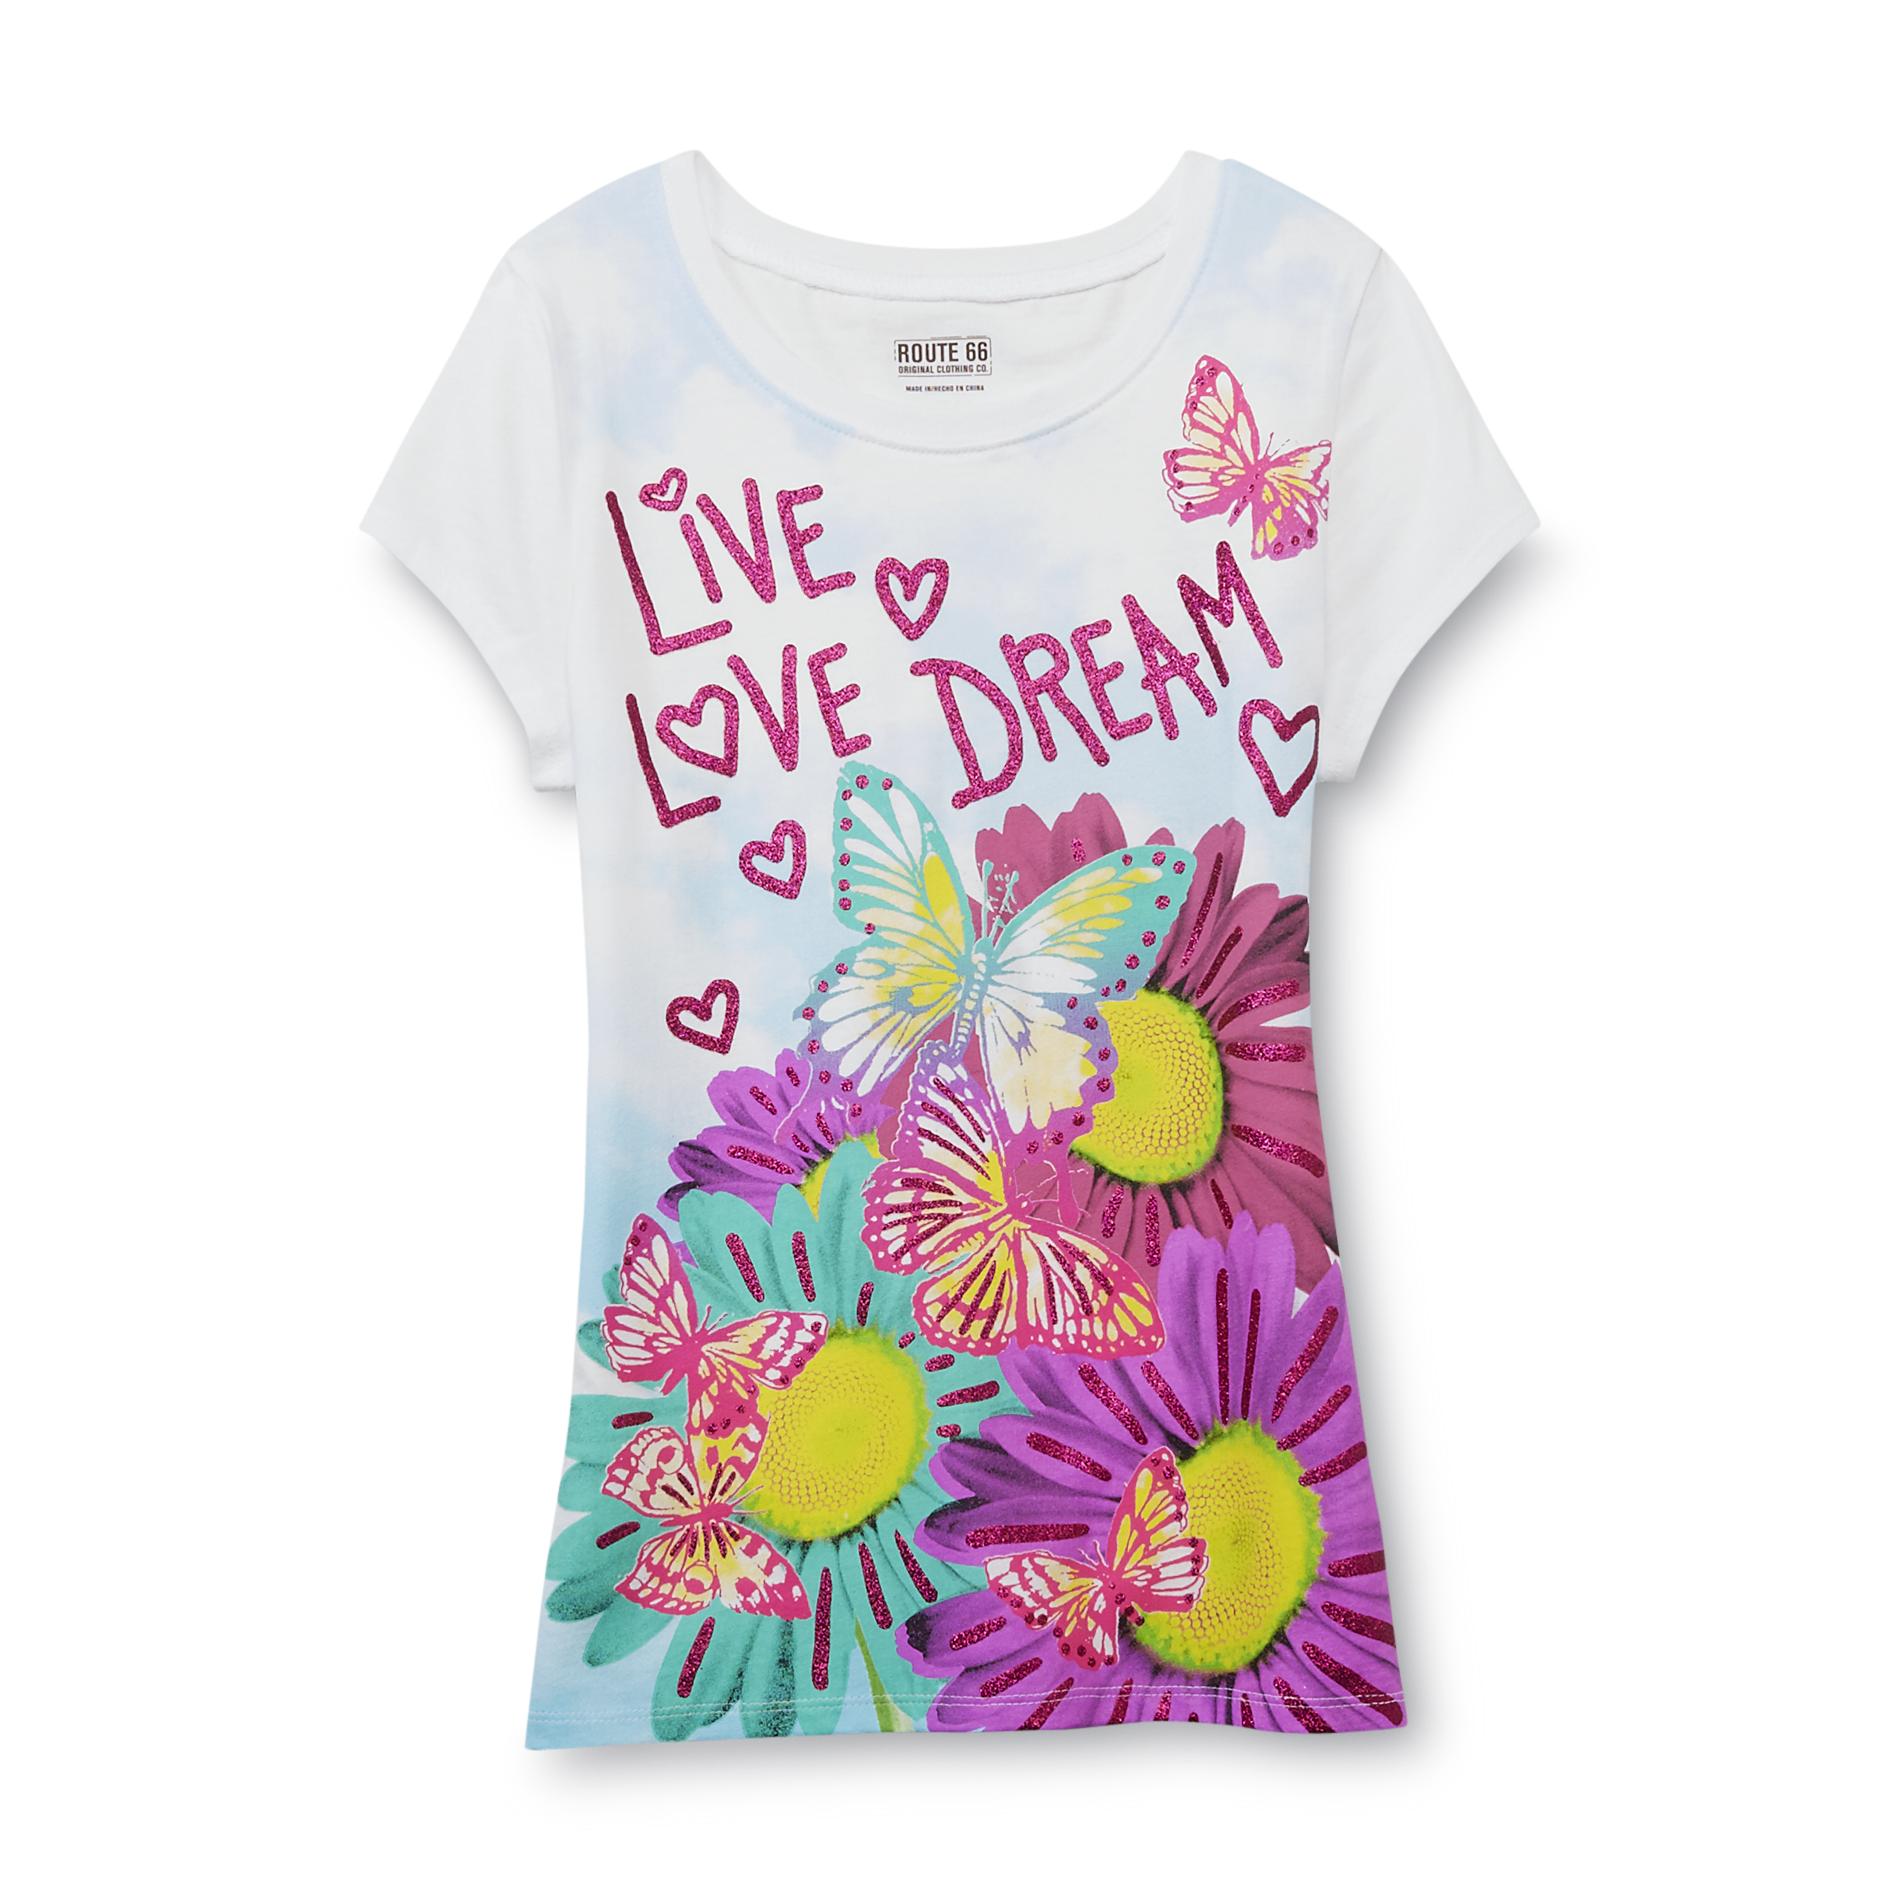 Route 66 Girl's Graphic T-Shirt - Live Love Dream